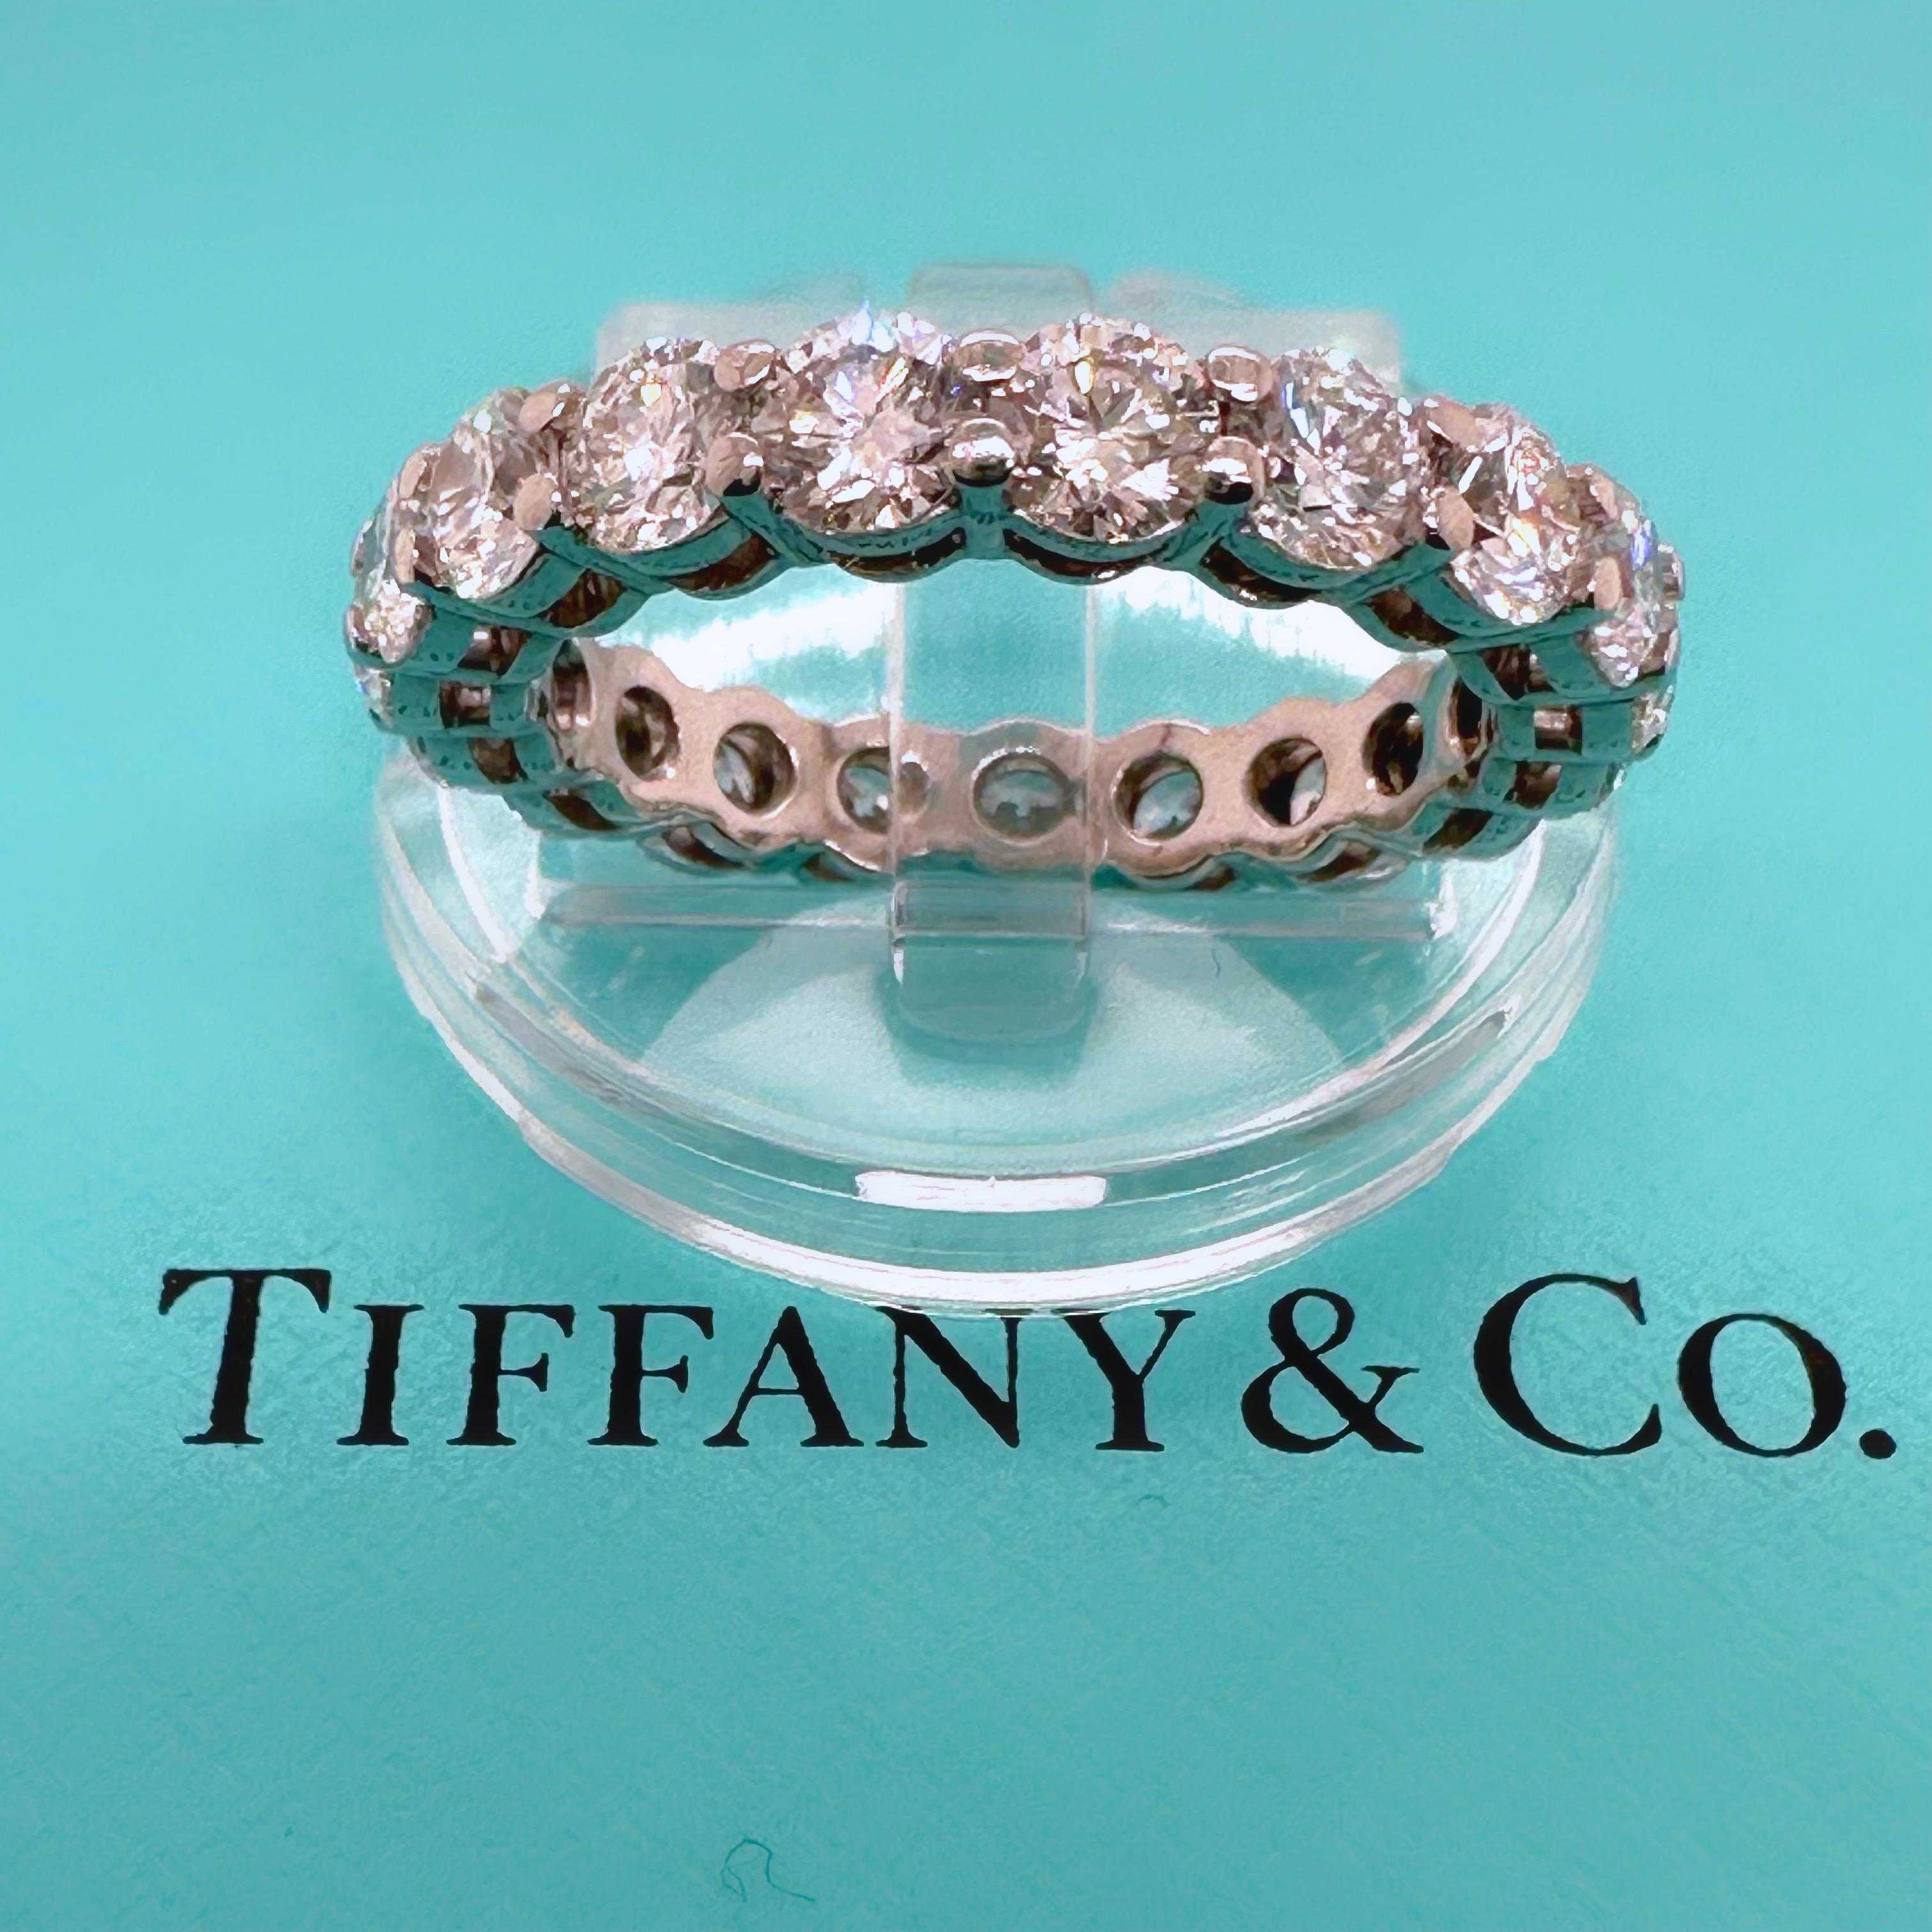 Tiffany & Co FOREVER Full Circle Round Diamond 3.02 tcw Band Ring Platinum For Sale 4